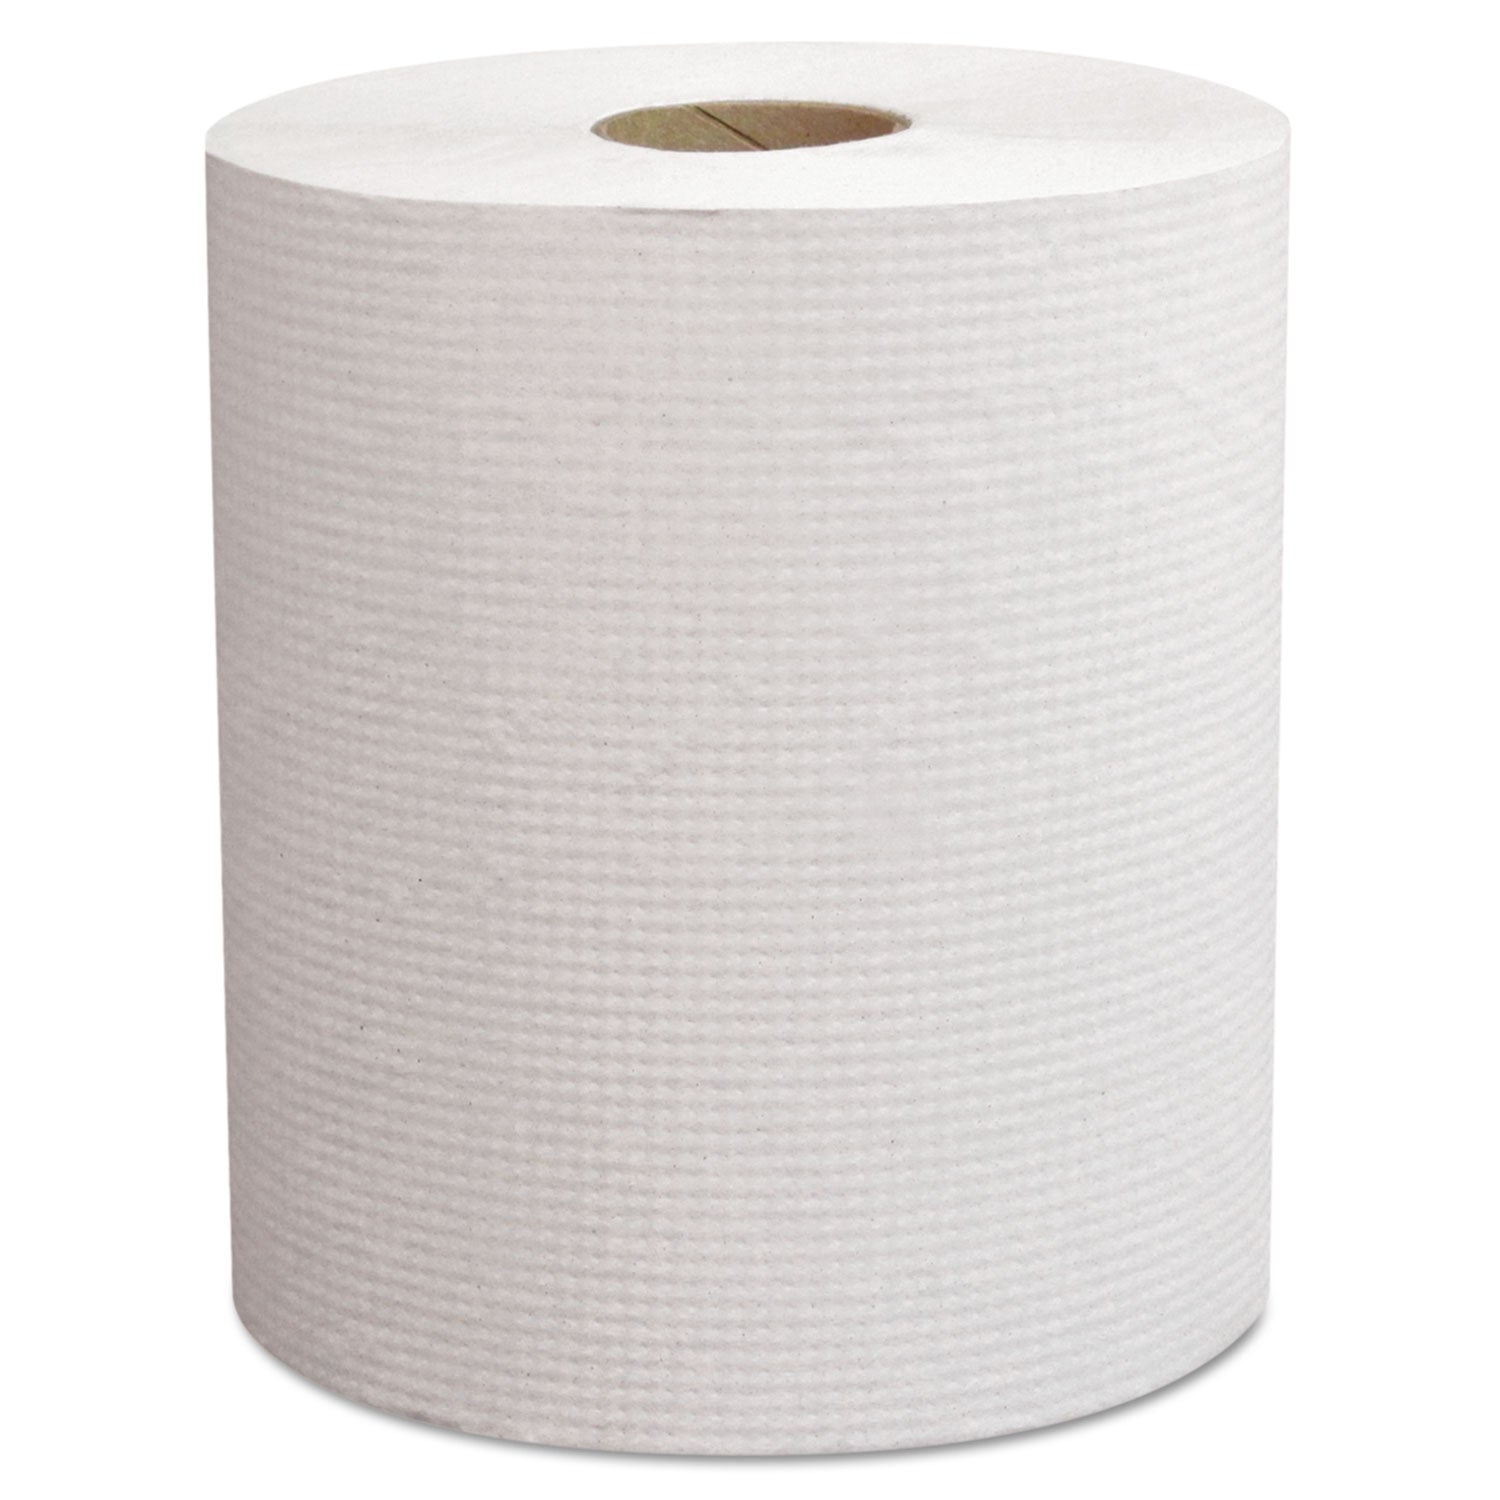 select-roll-paper-towels-1-ply-79-x-800-ft-white-6-rolls-carton_csdh080 - 1